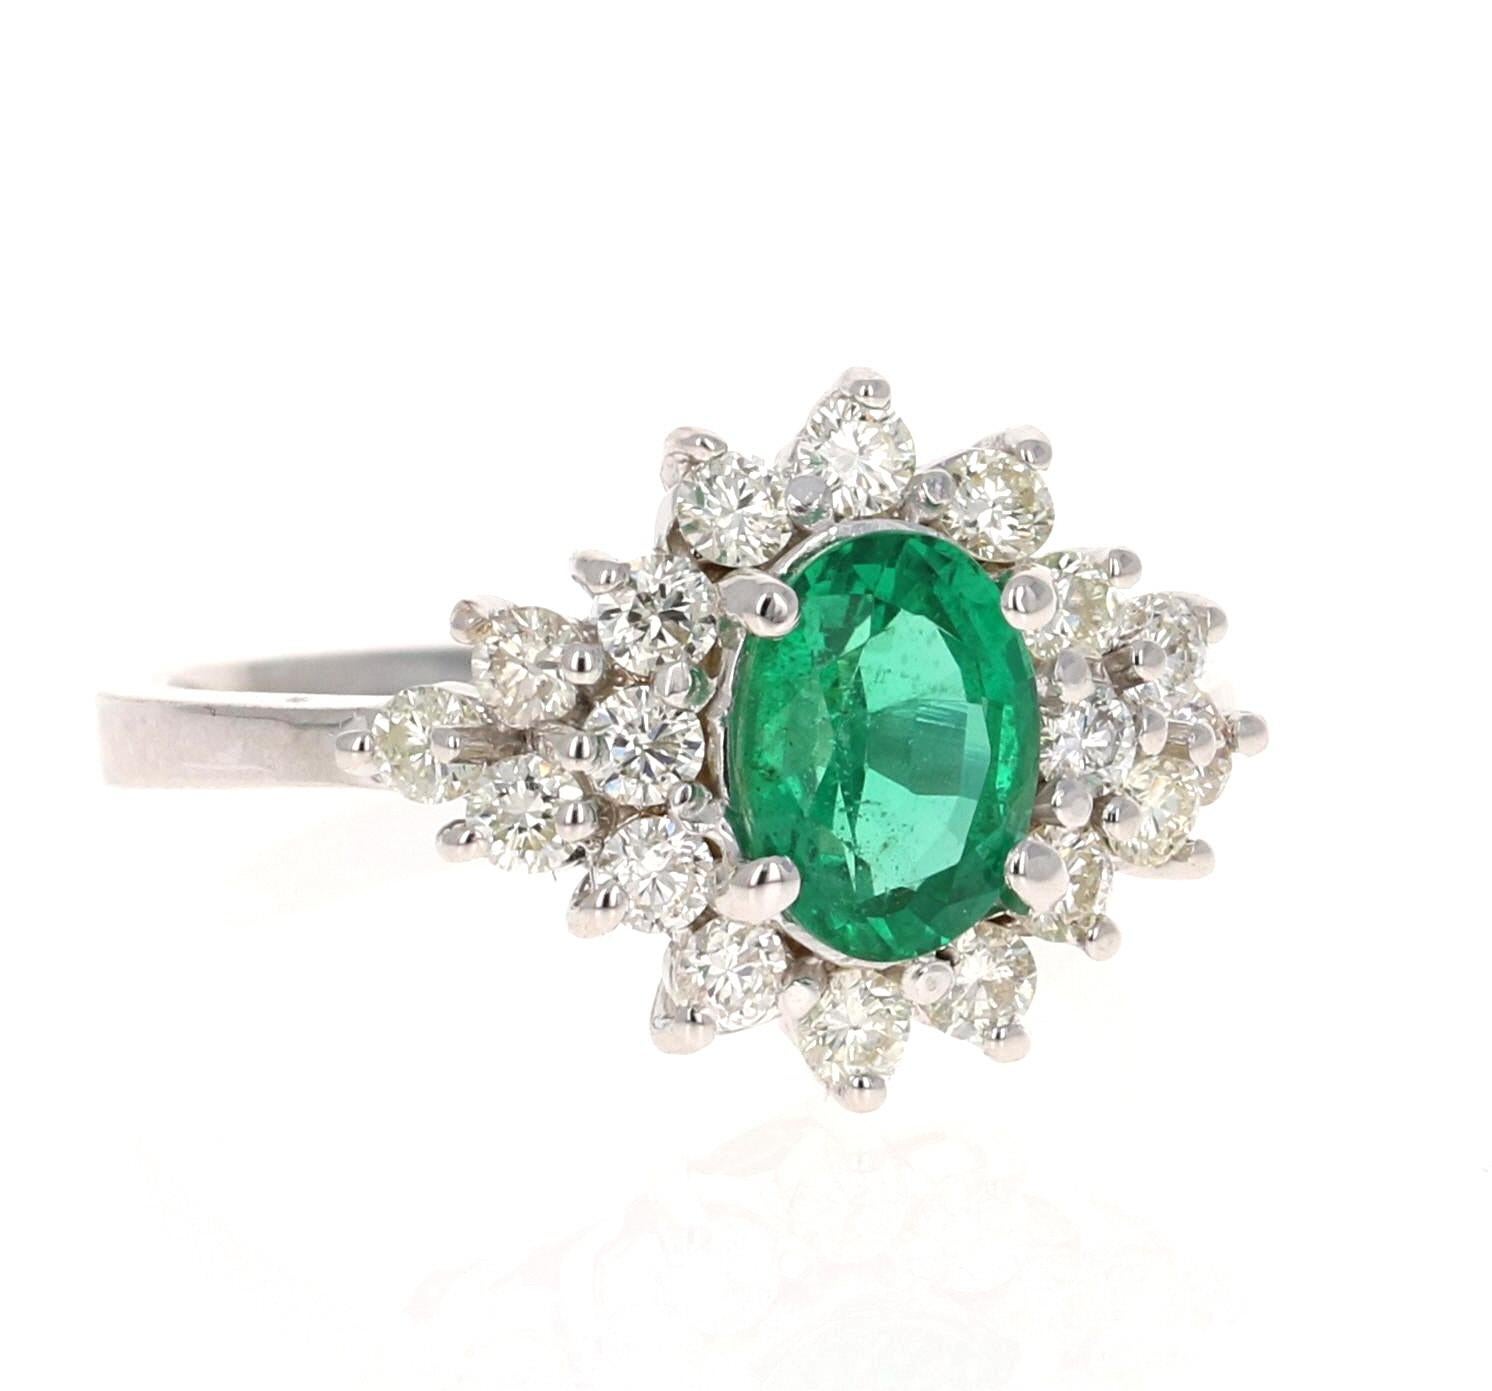 Stunning Oval Cut Emerald Diamond Cluster Ring! 

This Emerald ring has a gorgeous unique look. The center oval cut Emerald is 1.10 Carat and has a cluster of 18 Round Cut Diamonds weighing 0.71 Carats that surrounds it. 
The clarity and color of